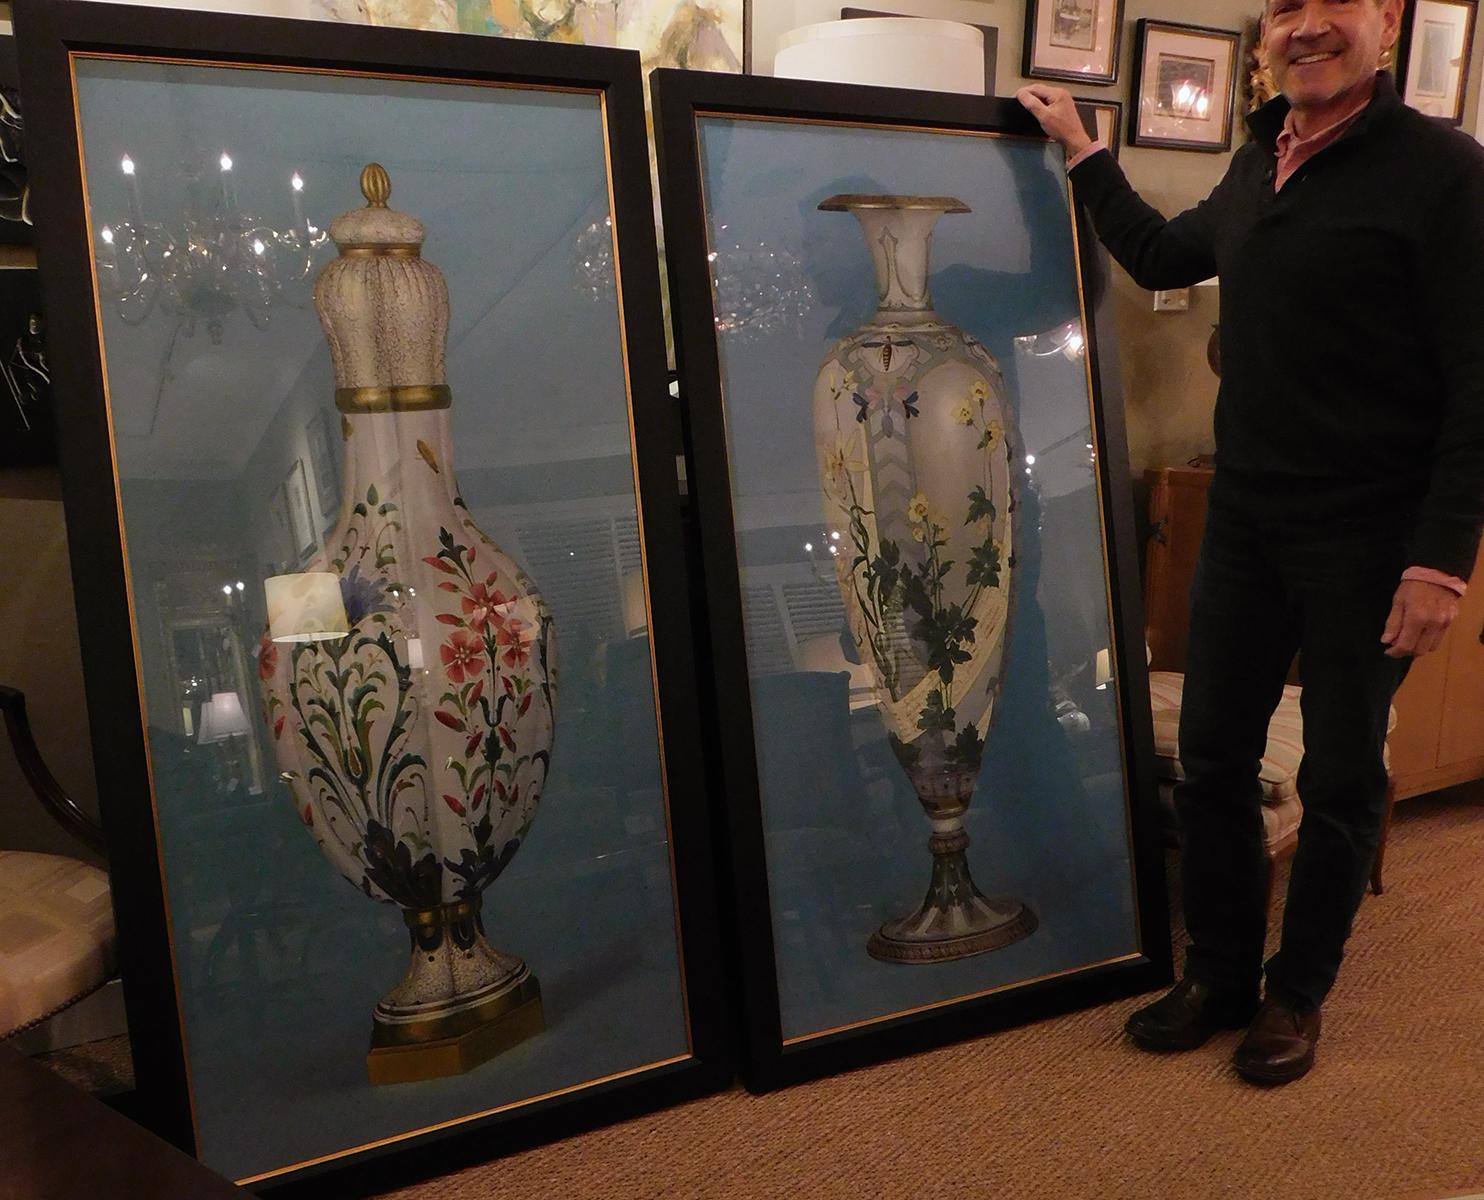 Each large well-rendered painting depicting Chinese vases finely detailed with colorful floral and foliate stems.